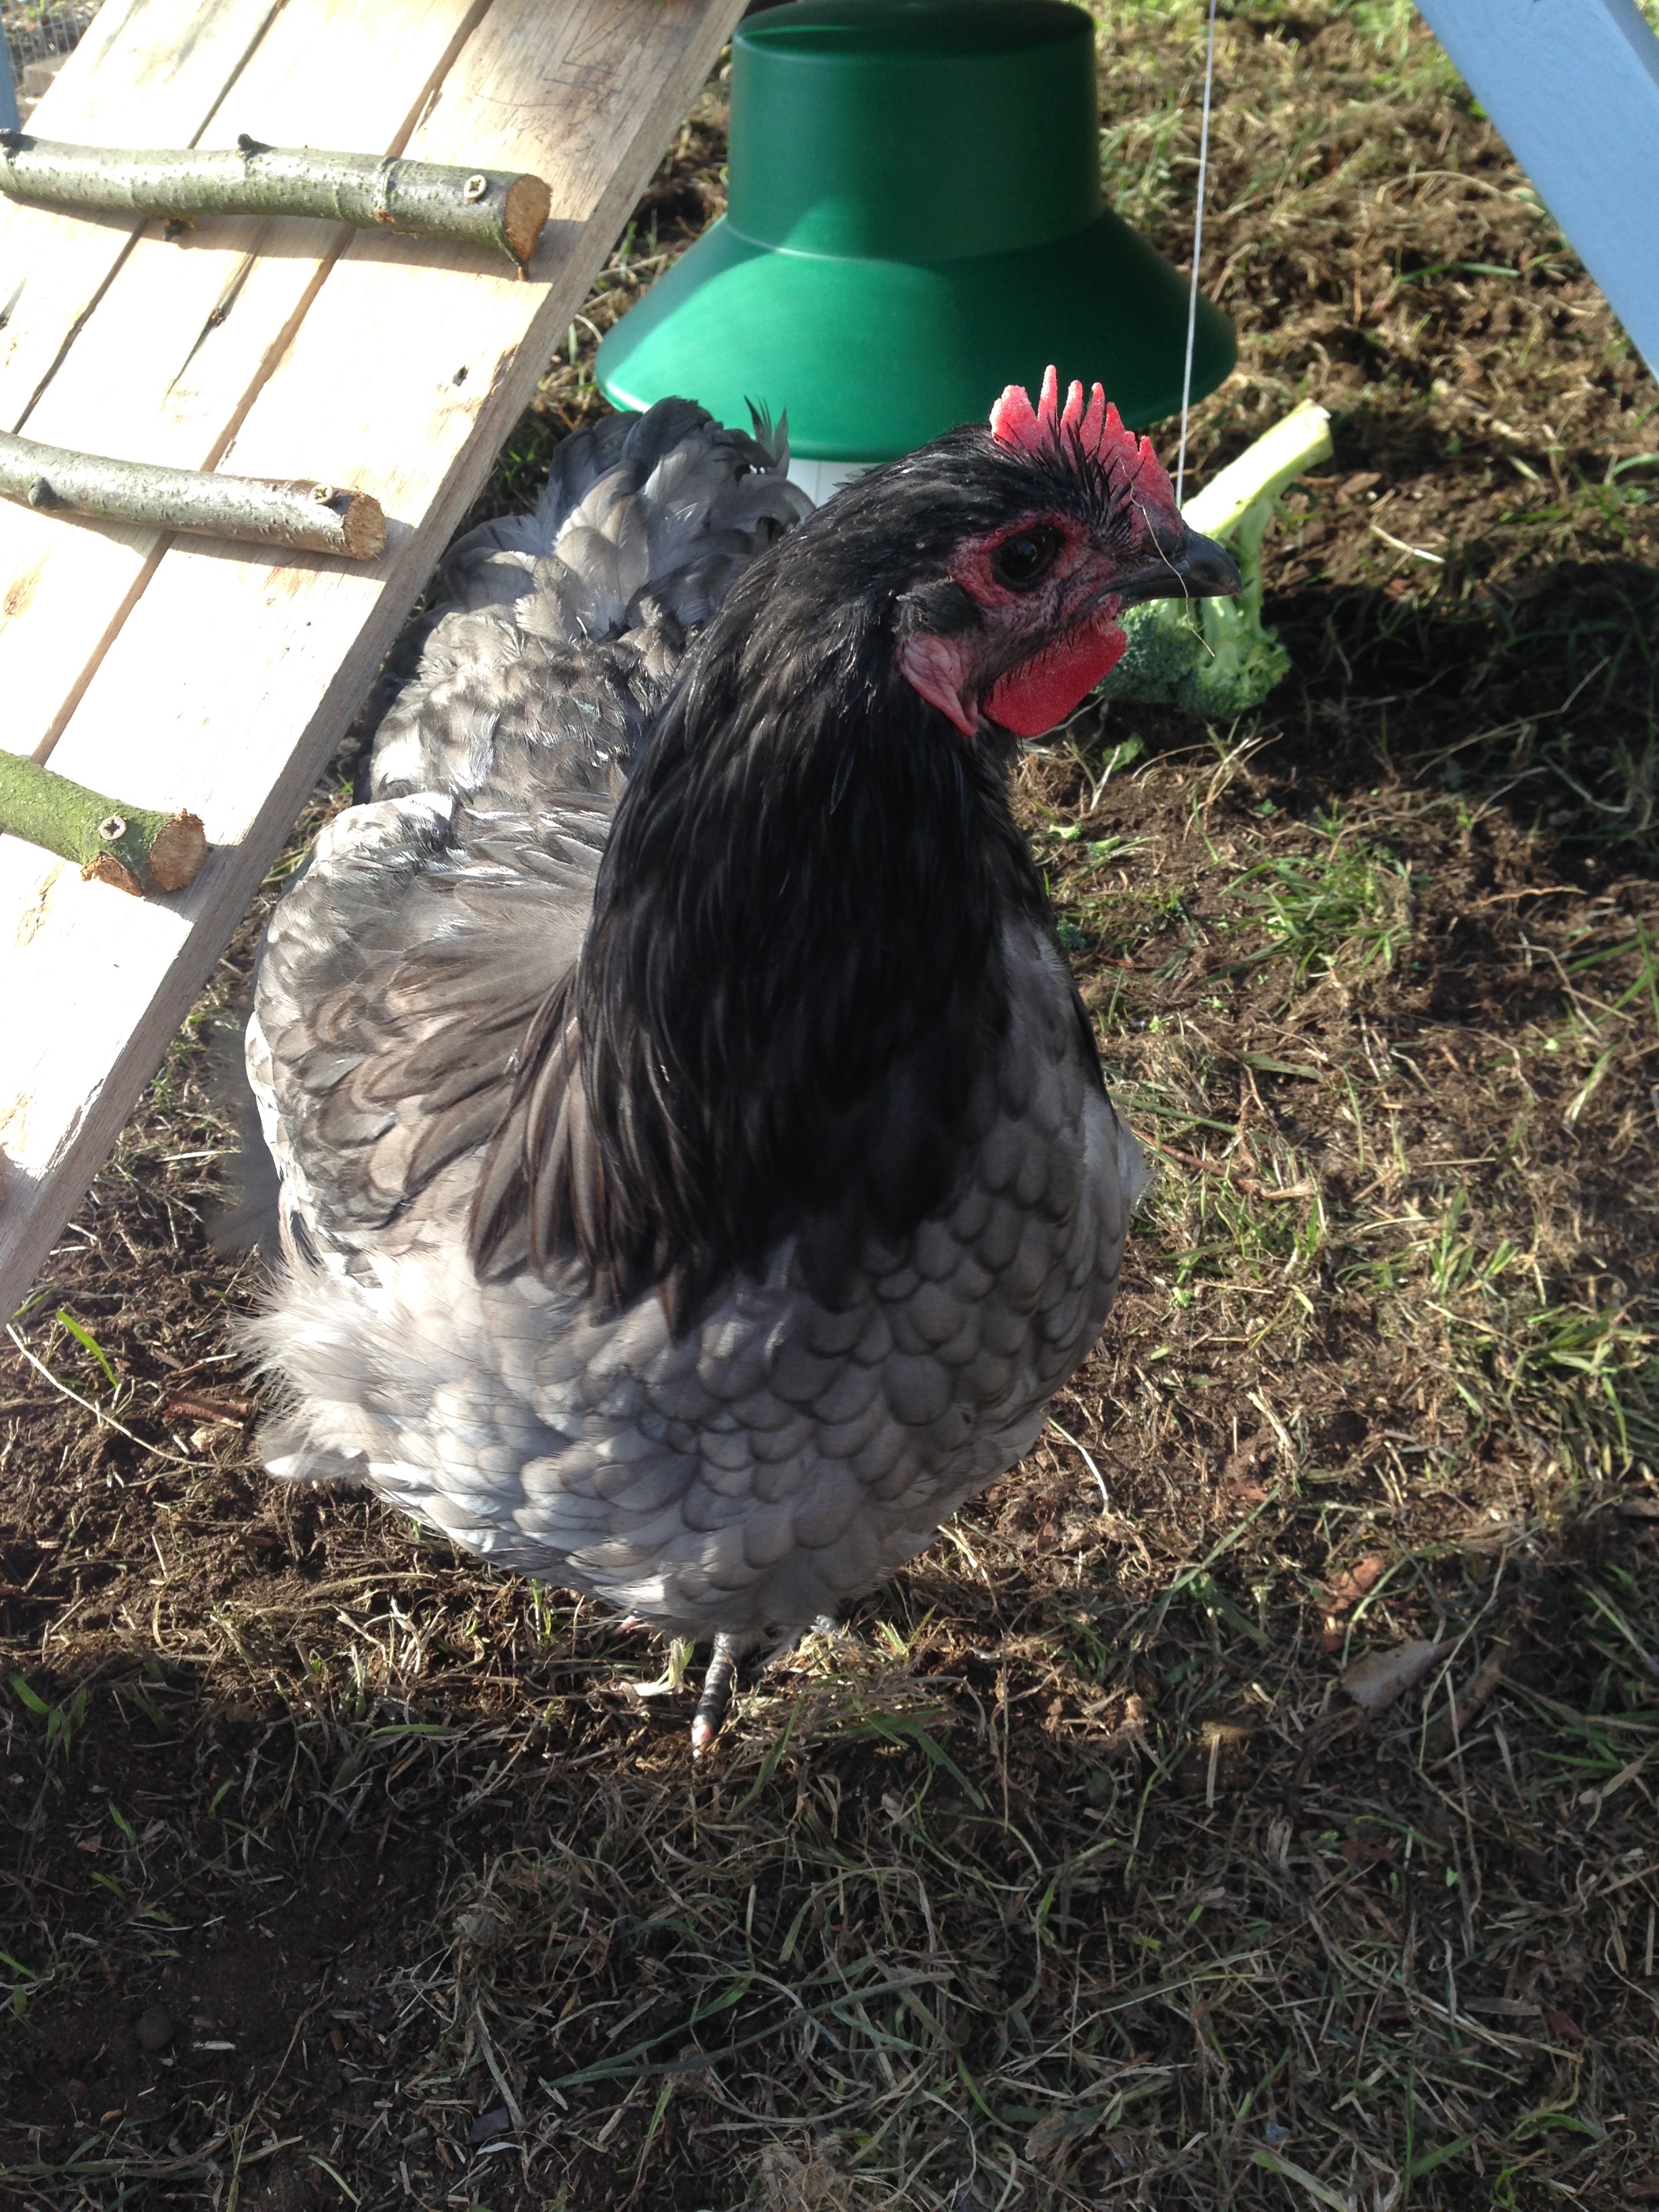 'Delilah' the blue orpington 'Hen' (who turned out to be a cockrel